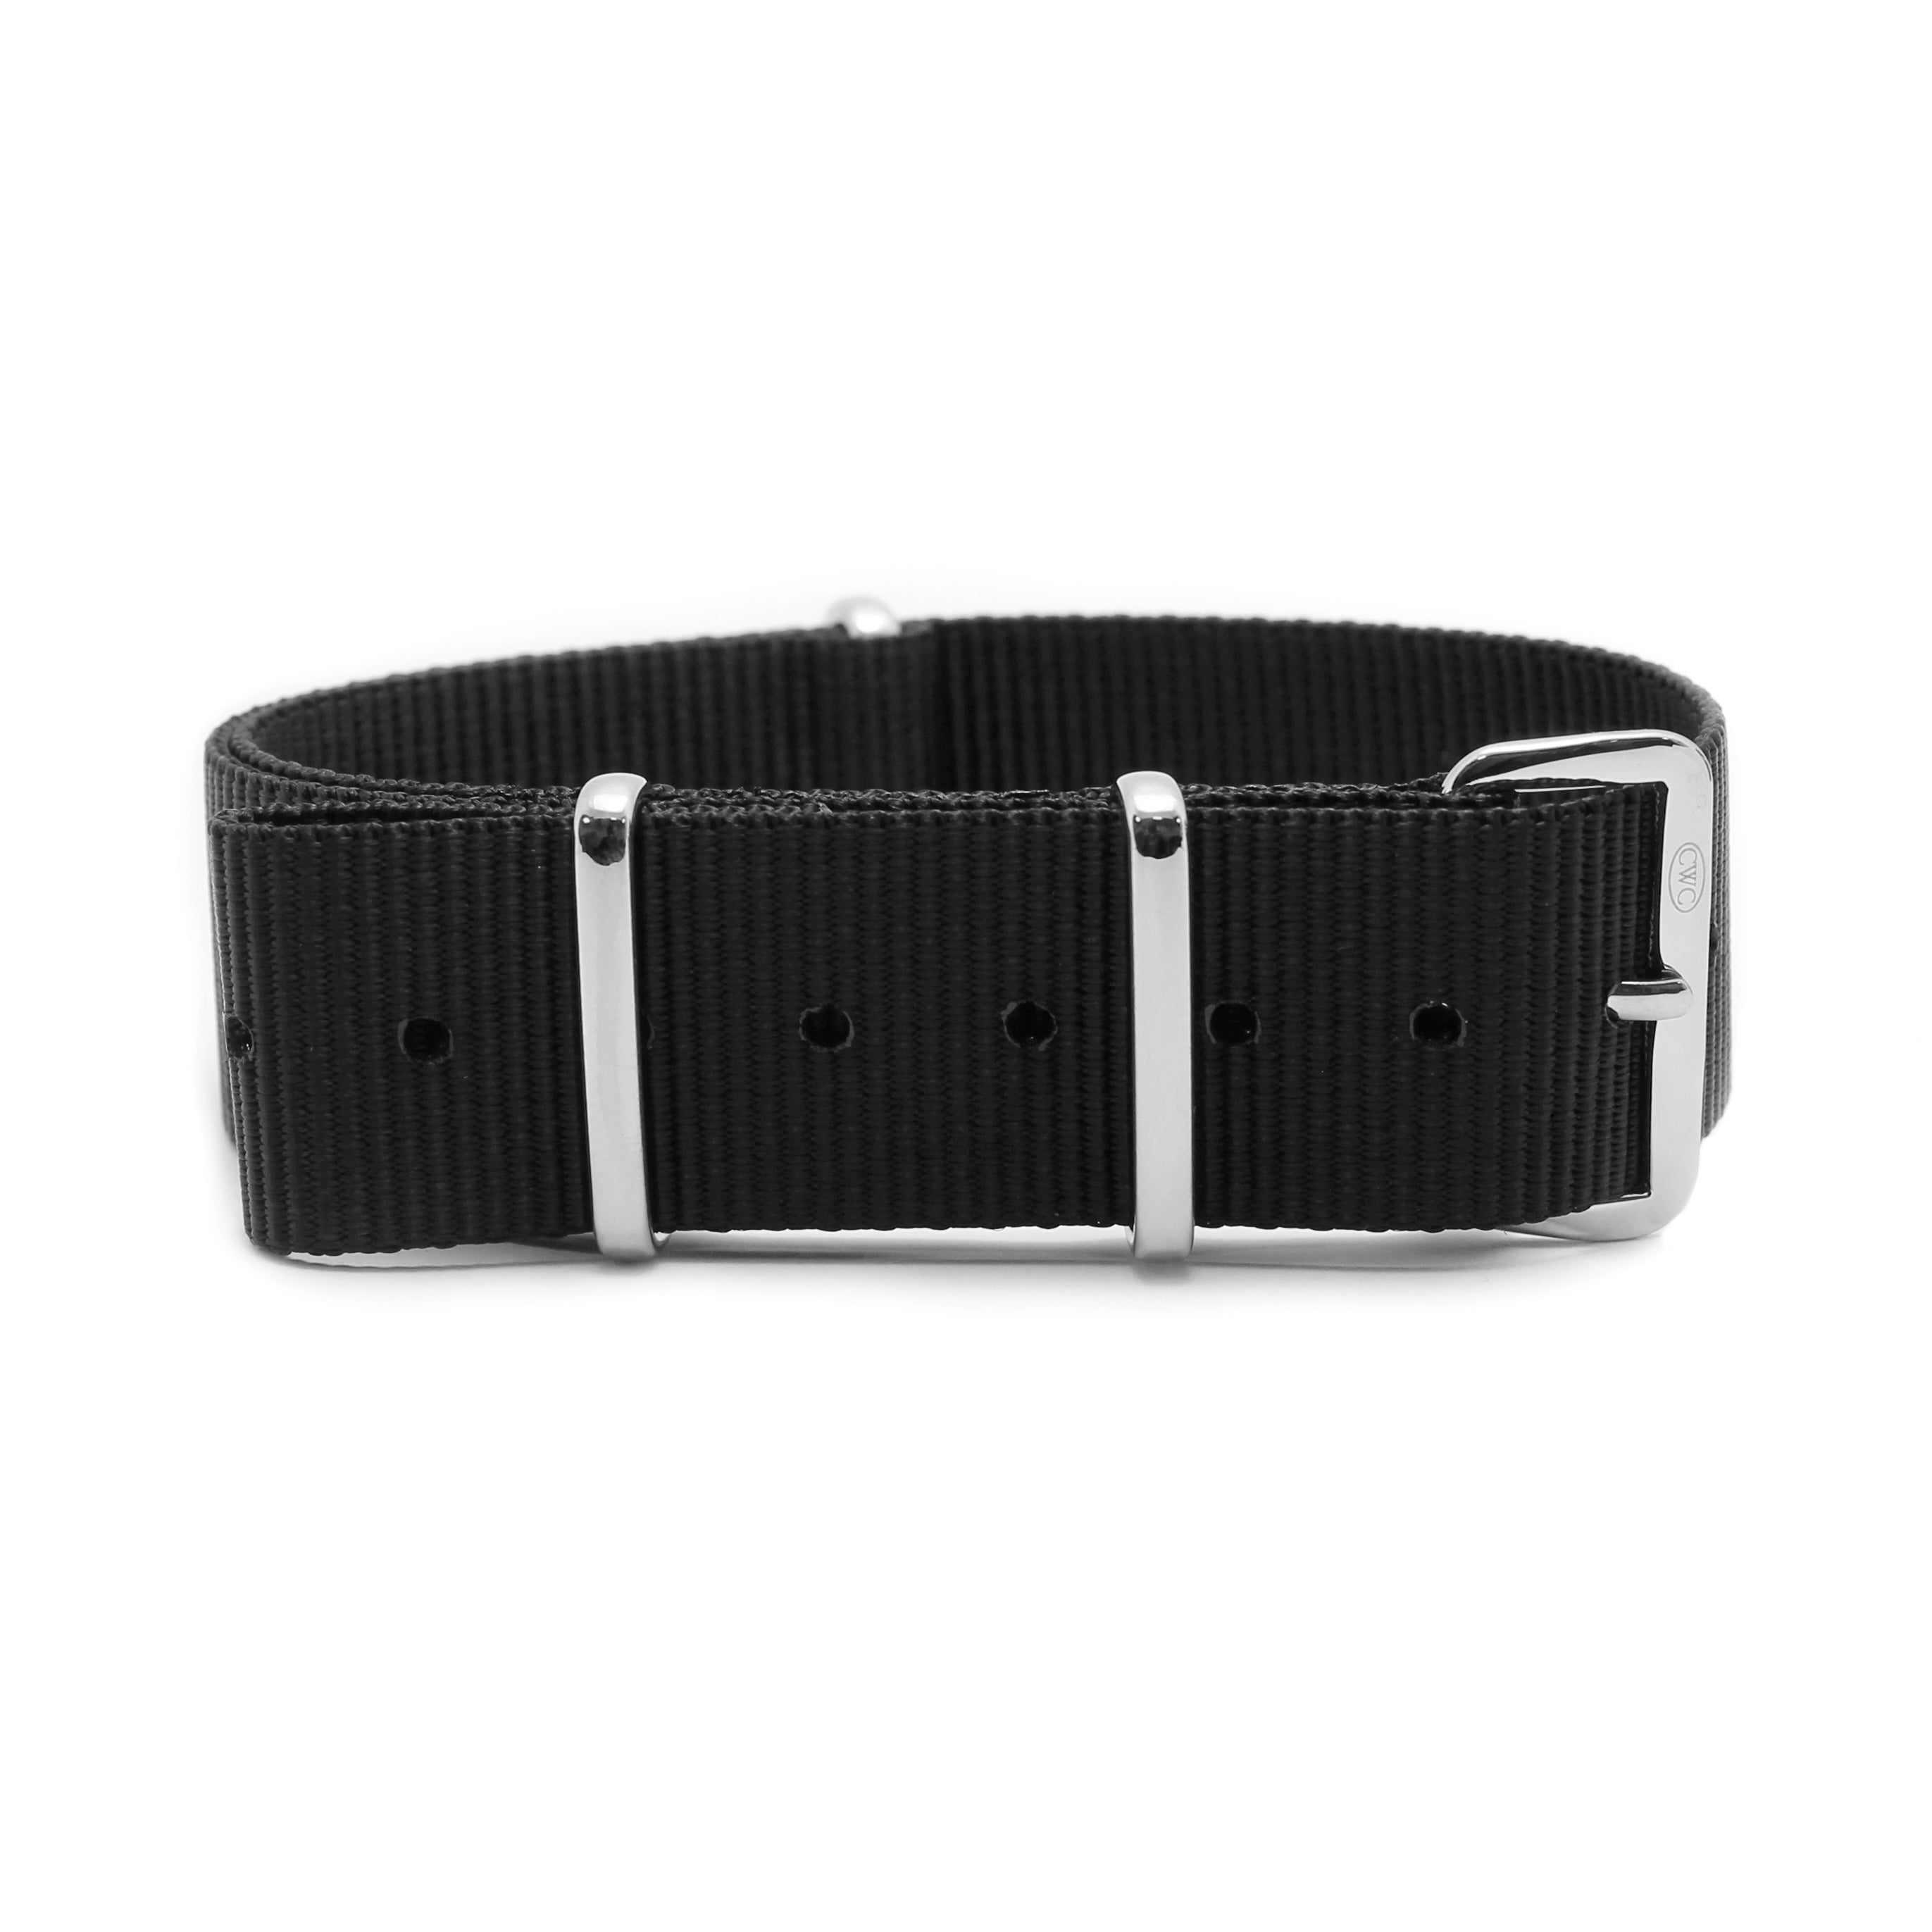 CABOT MILITARY WATCH STRAP - BLACK WITH GLOSS SILVER BUCKLE